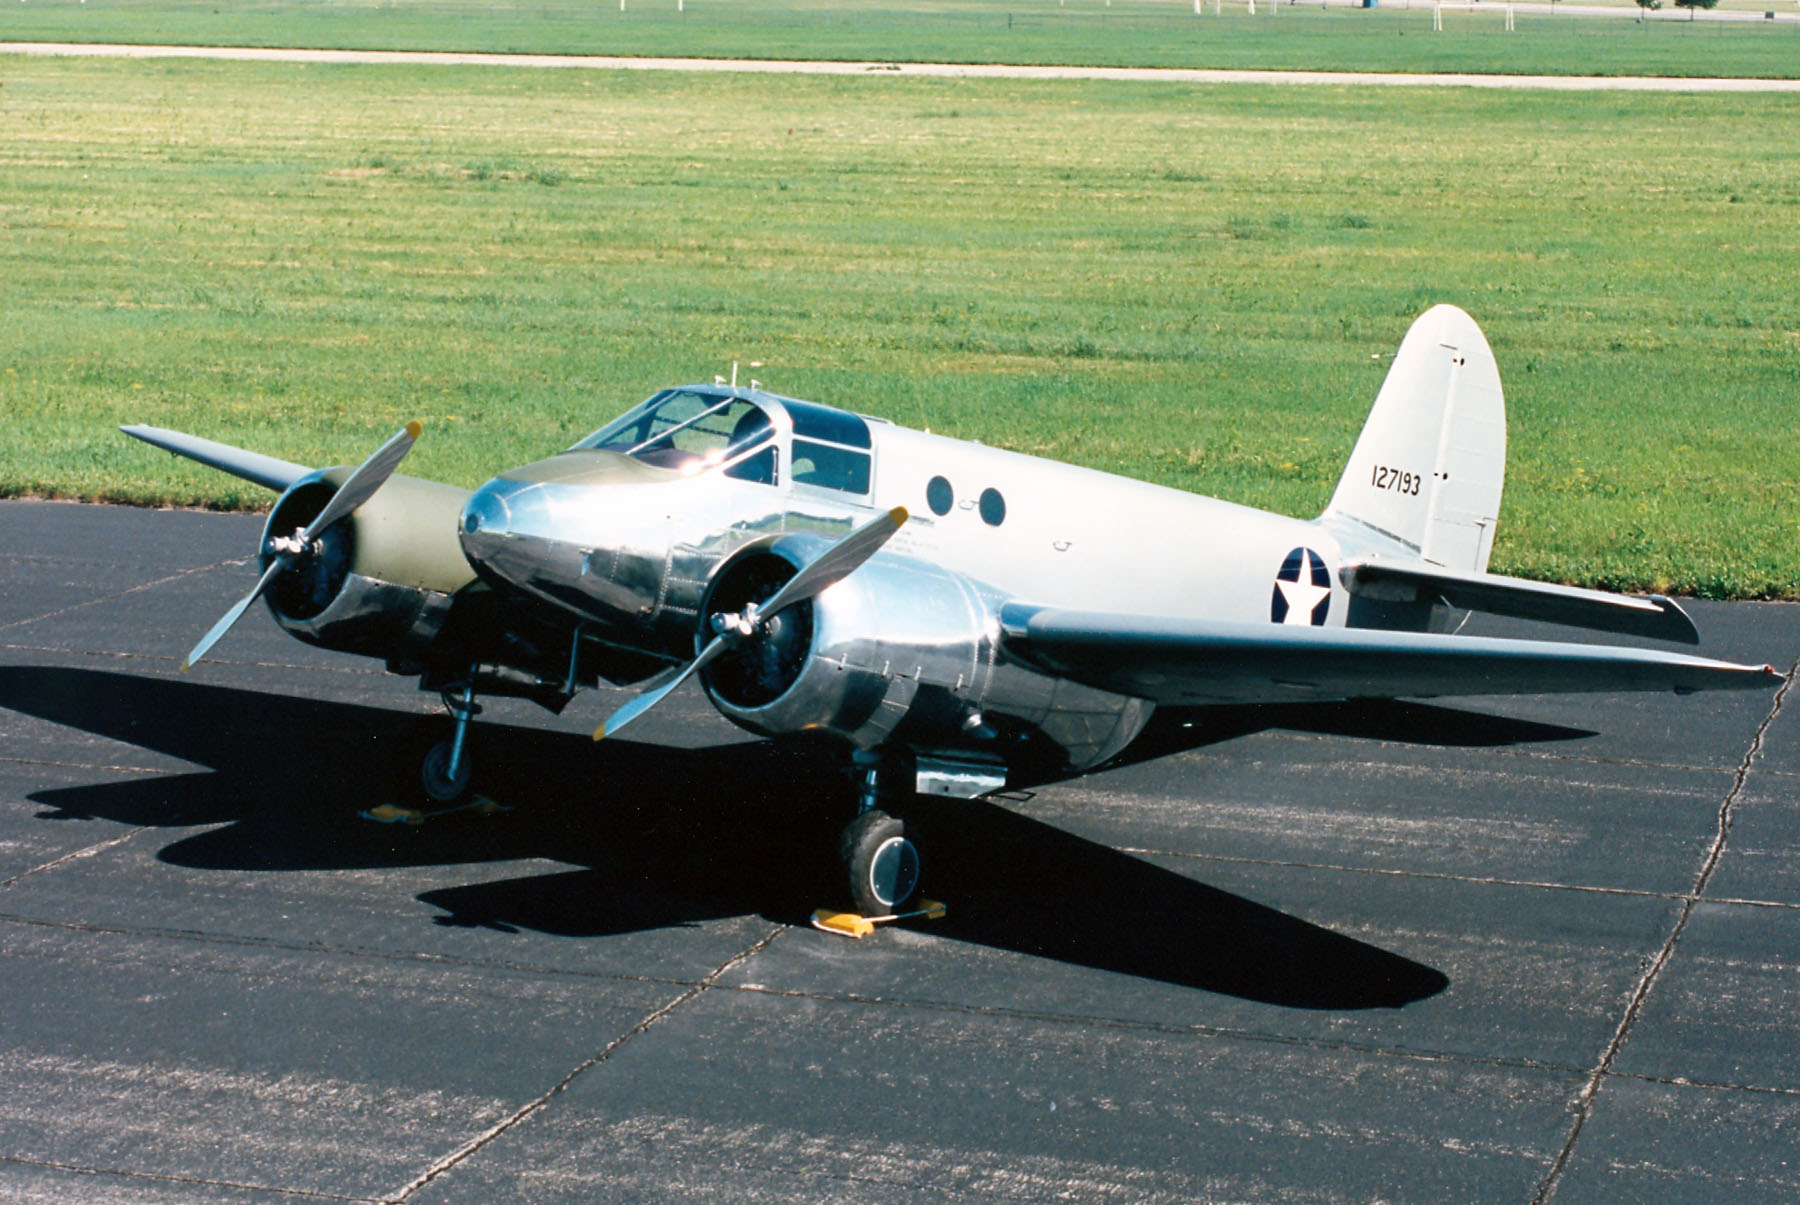 AT-10 Wichita 41-27193 at the National Museum of the United States Air Force. (U.S. Air Force photo)